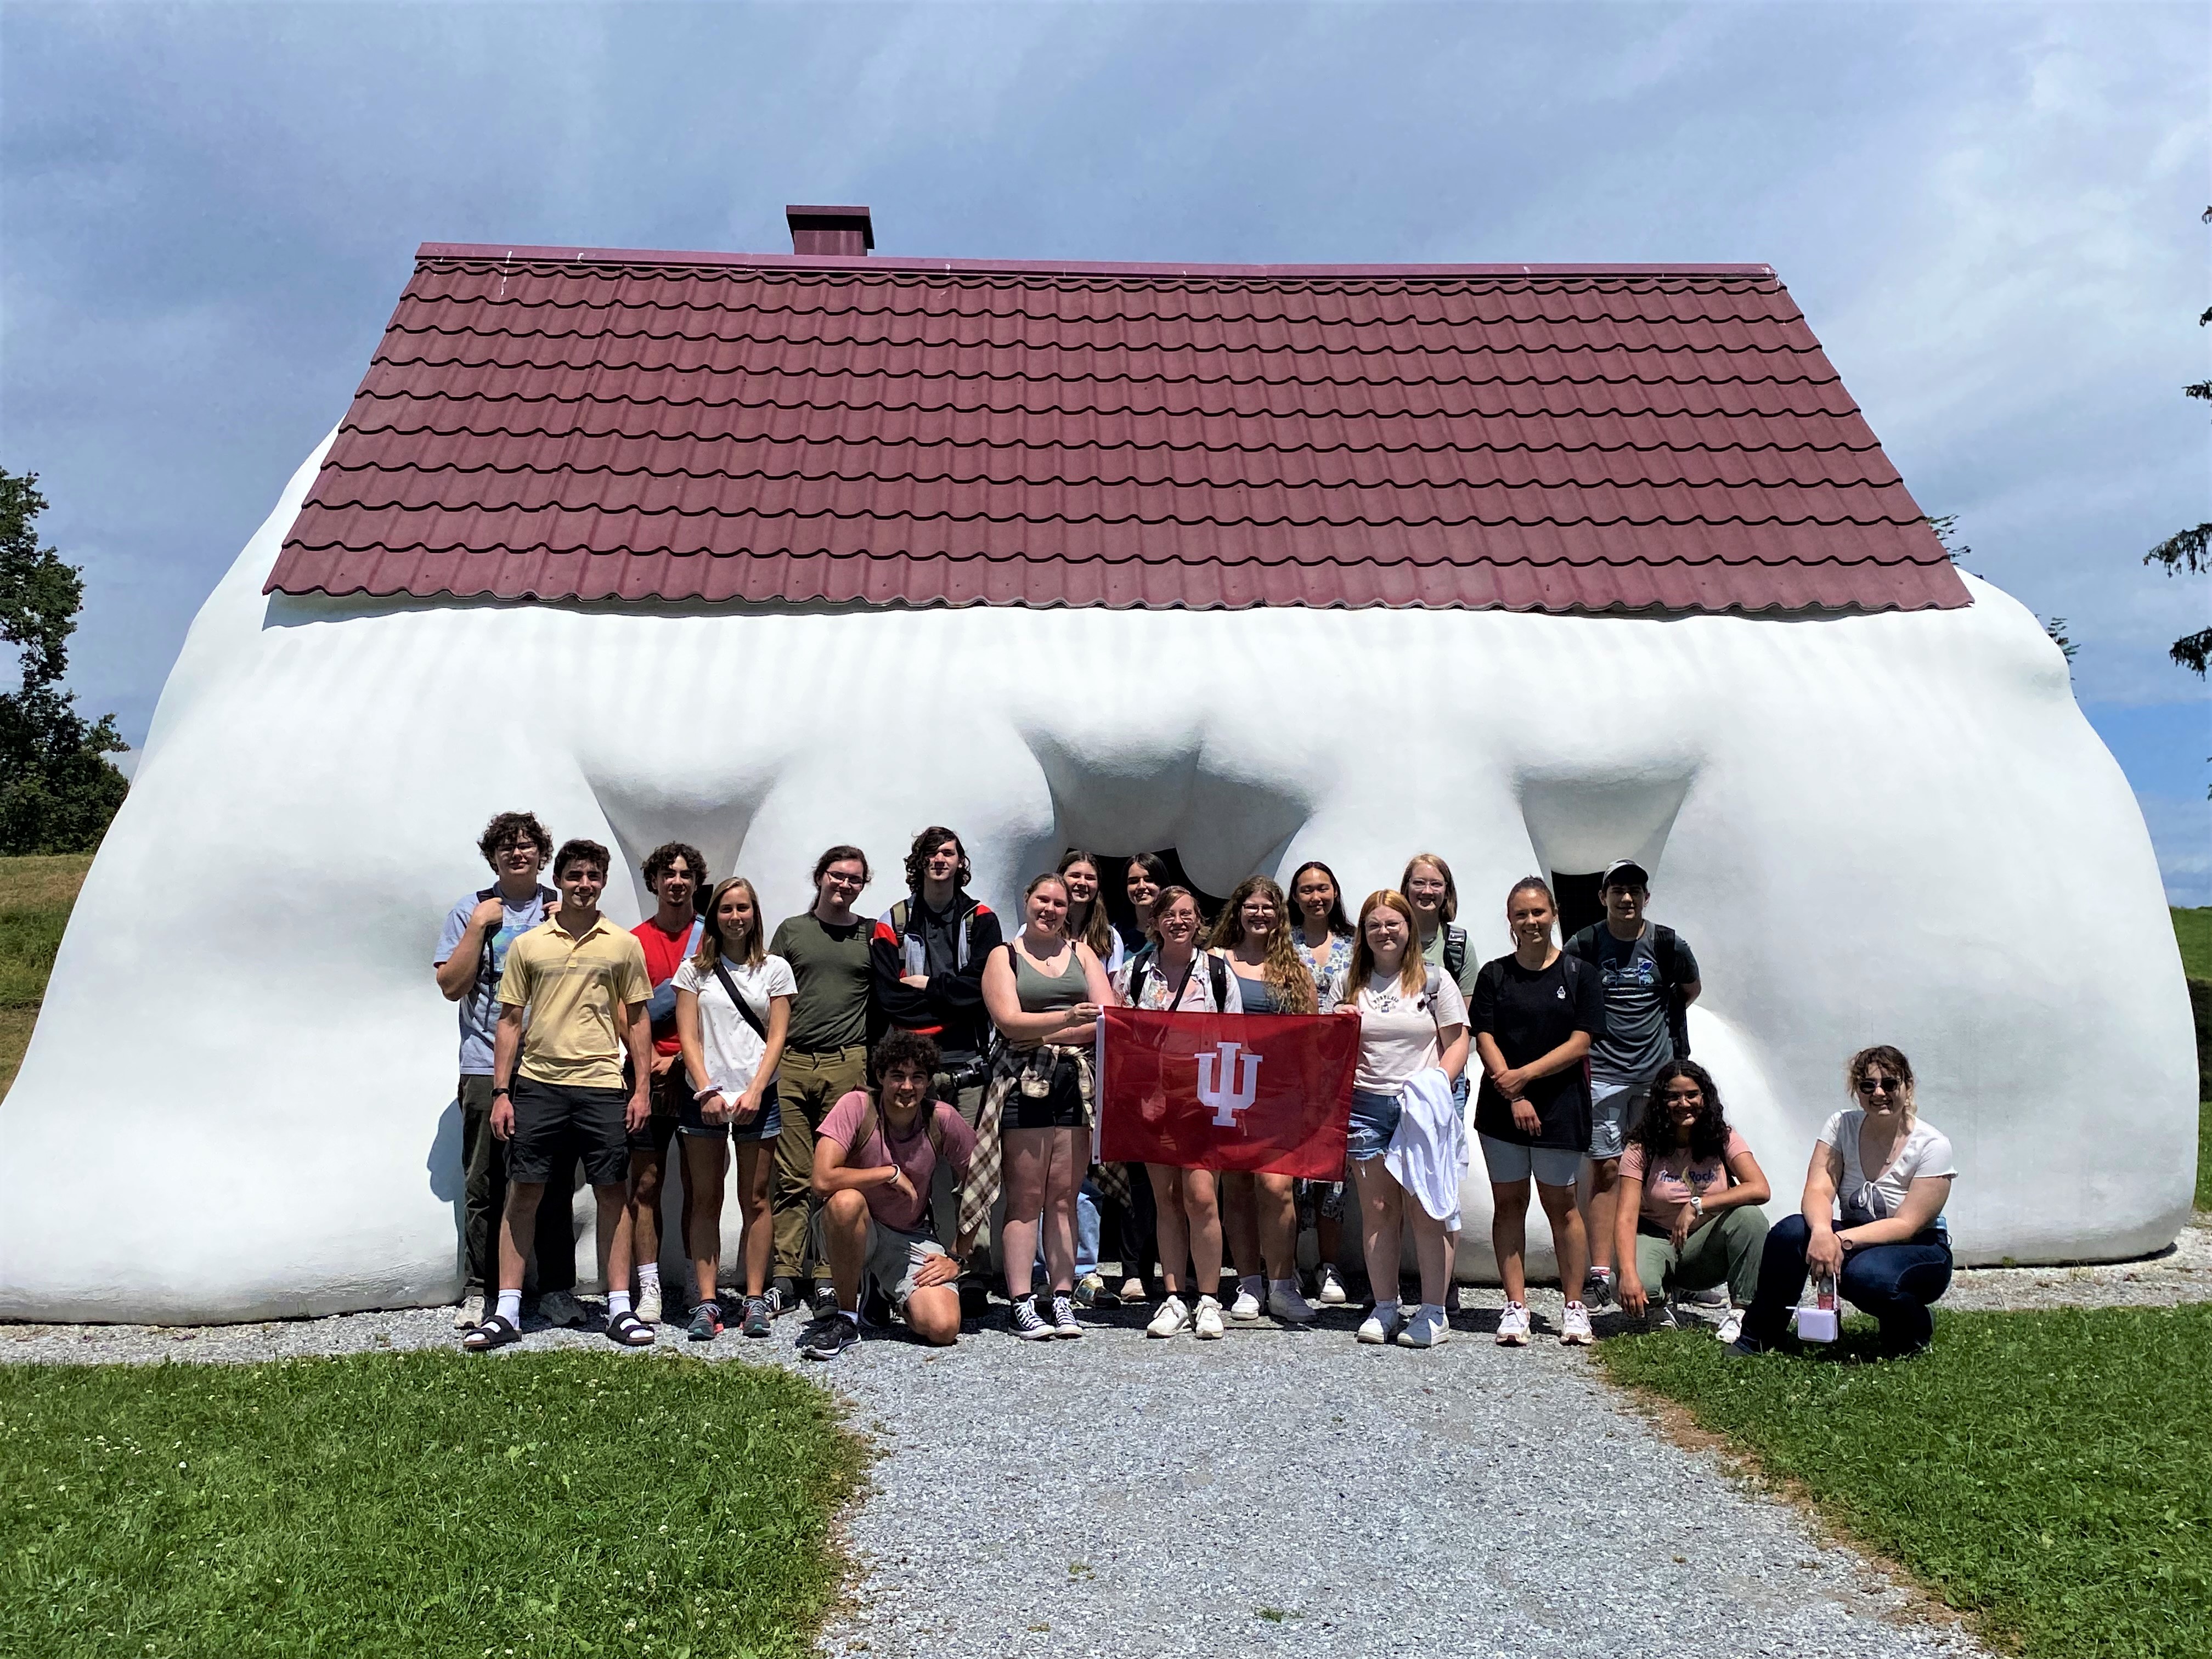 The 2023 Graz team stands in front of a white sculpture with the IU flag